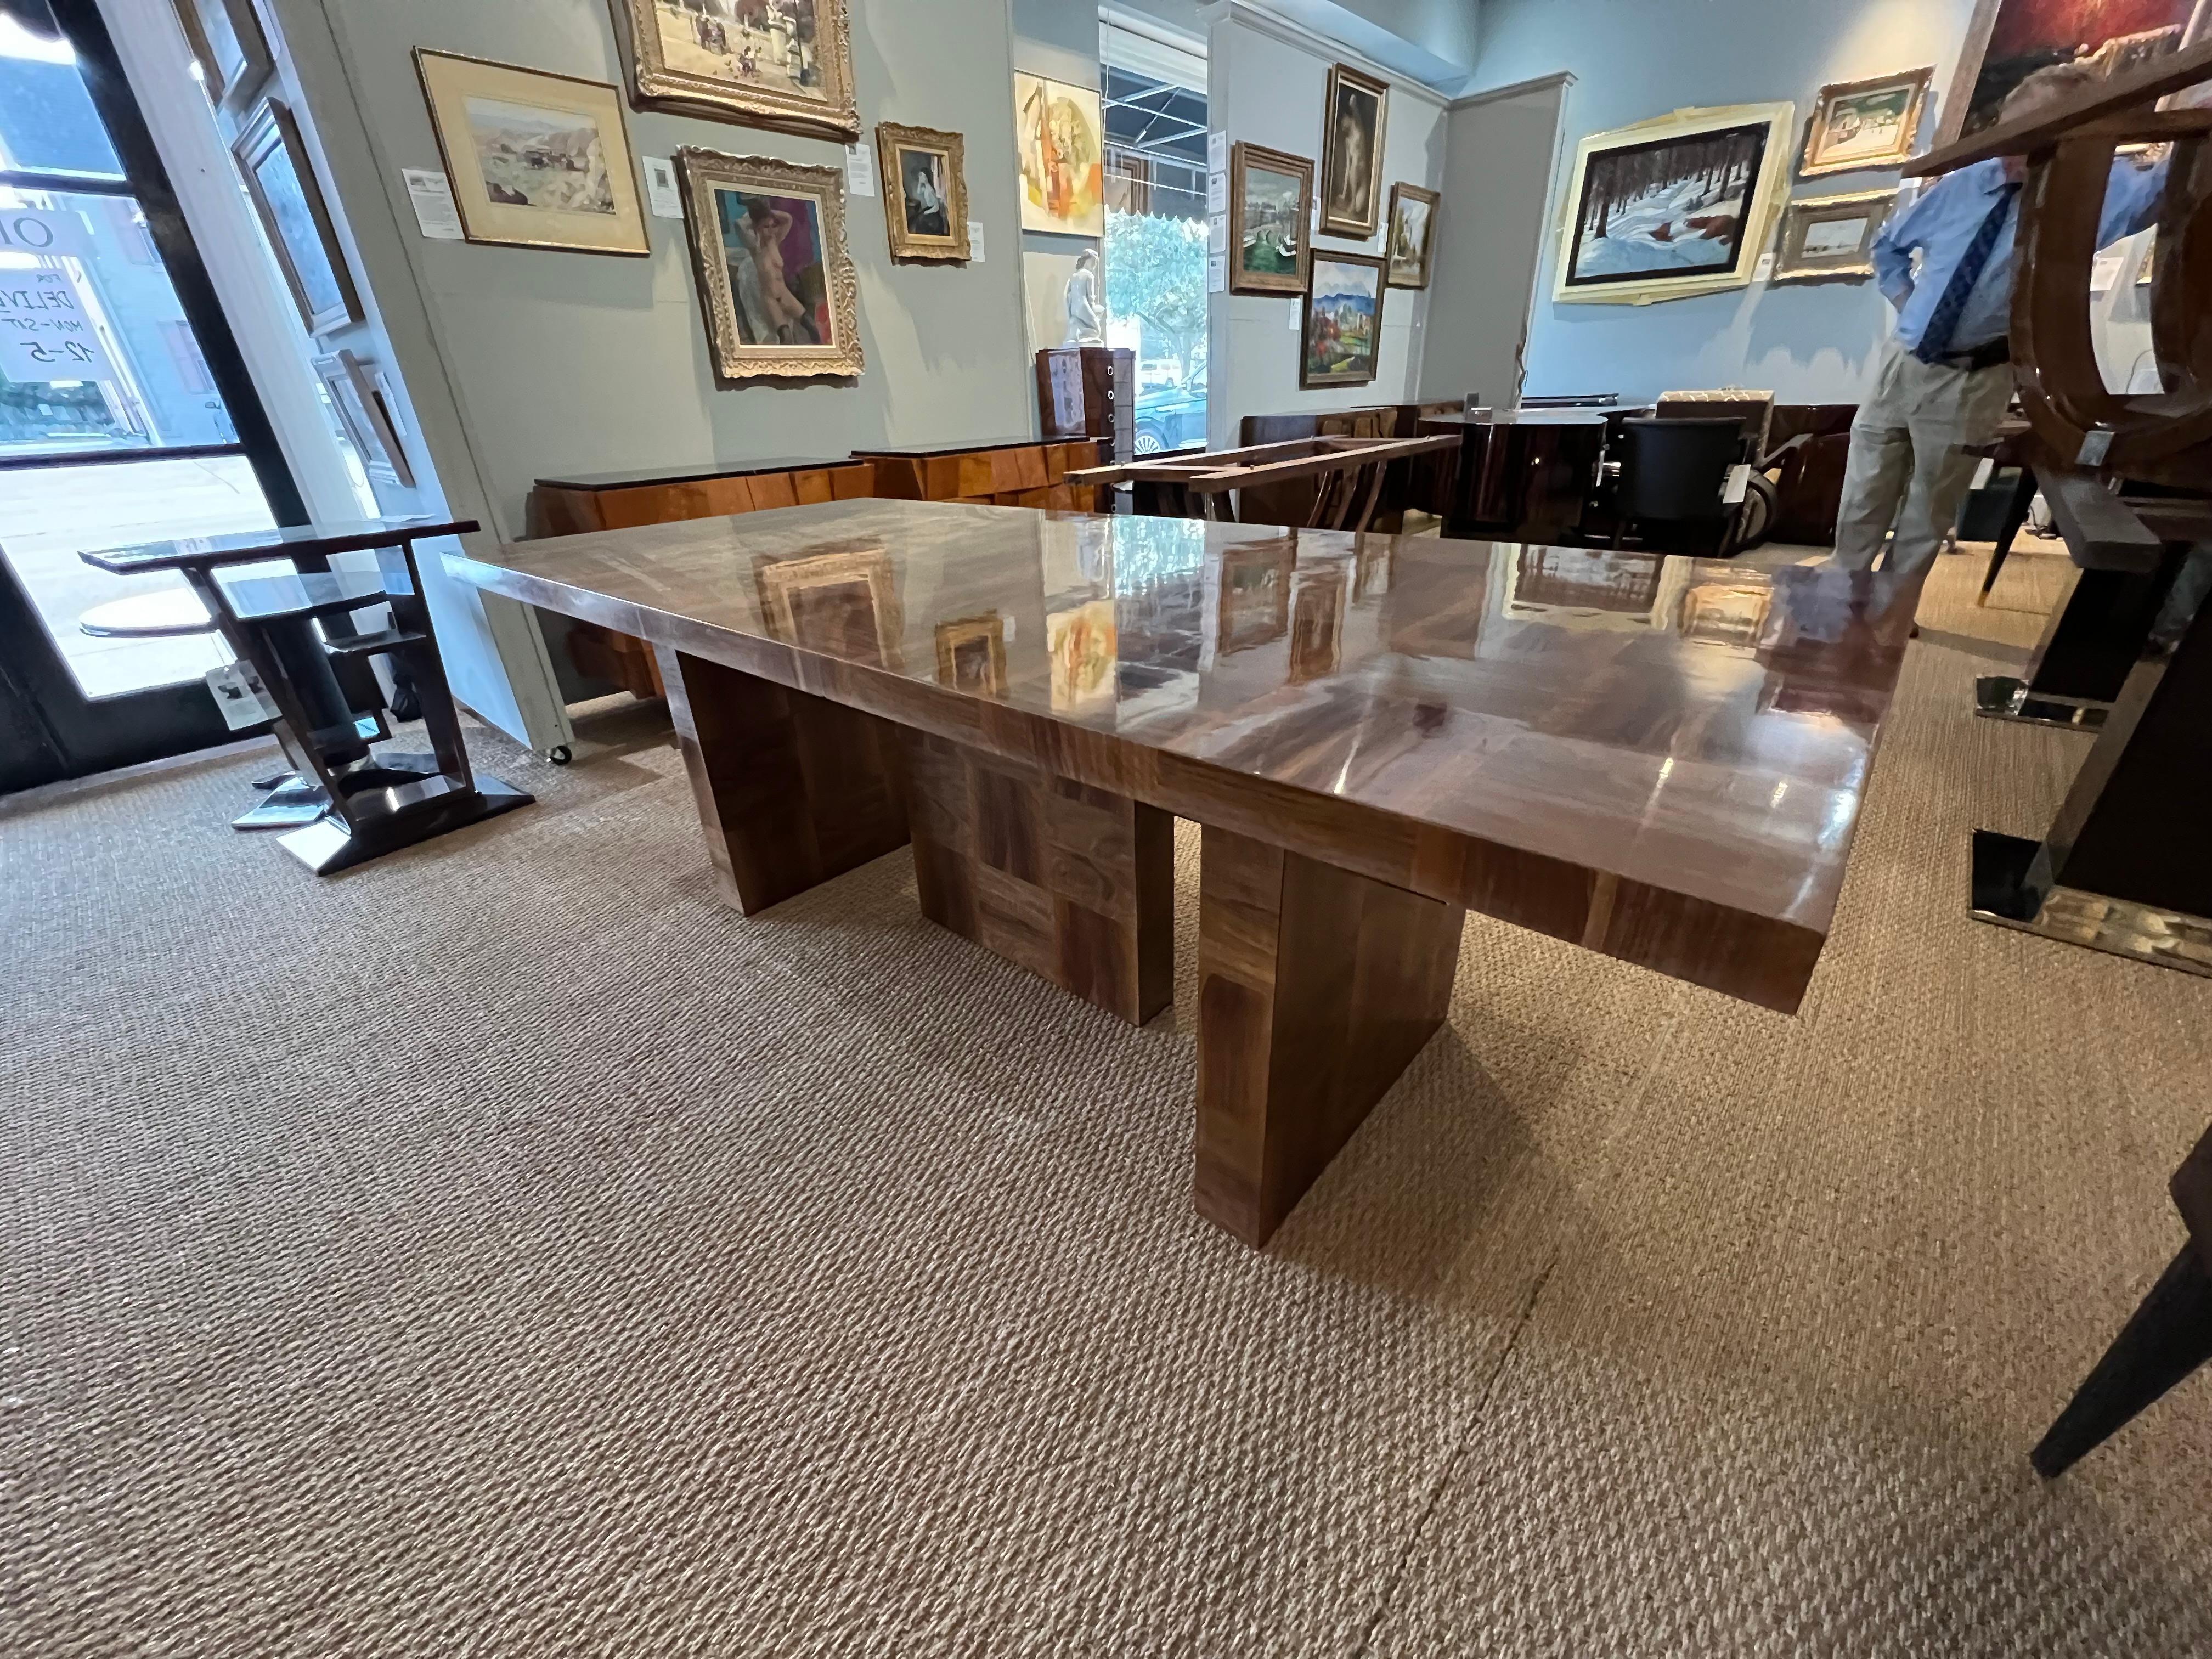 Beautiful dinning room table from Bauhaus are. Made in Germany, c. 1950s
Table top is composed our of square shape walnut pieces. Top is resting on the prominent base that is composed out of 3 walnut rectangles with wood spheres on top. There is